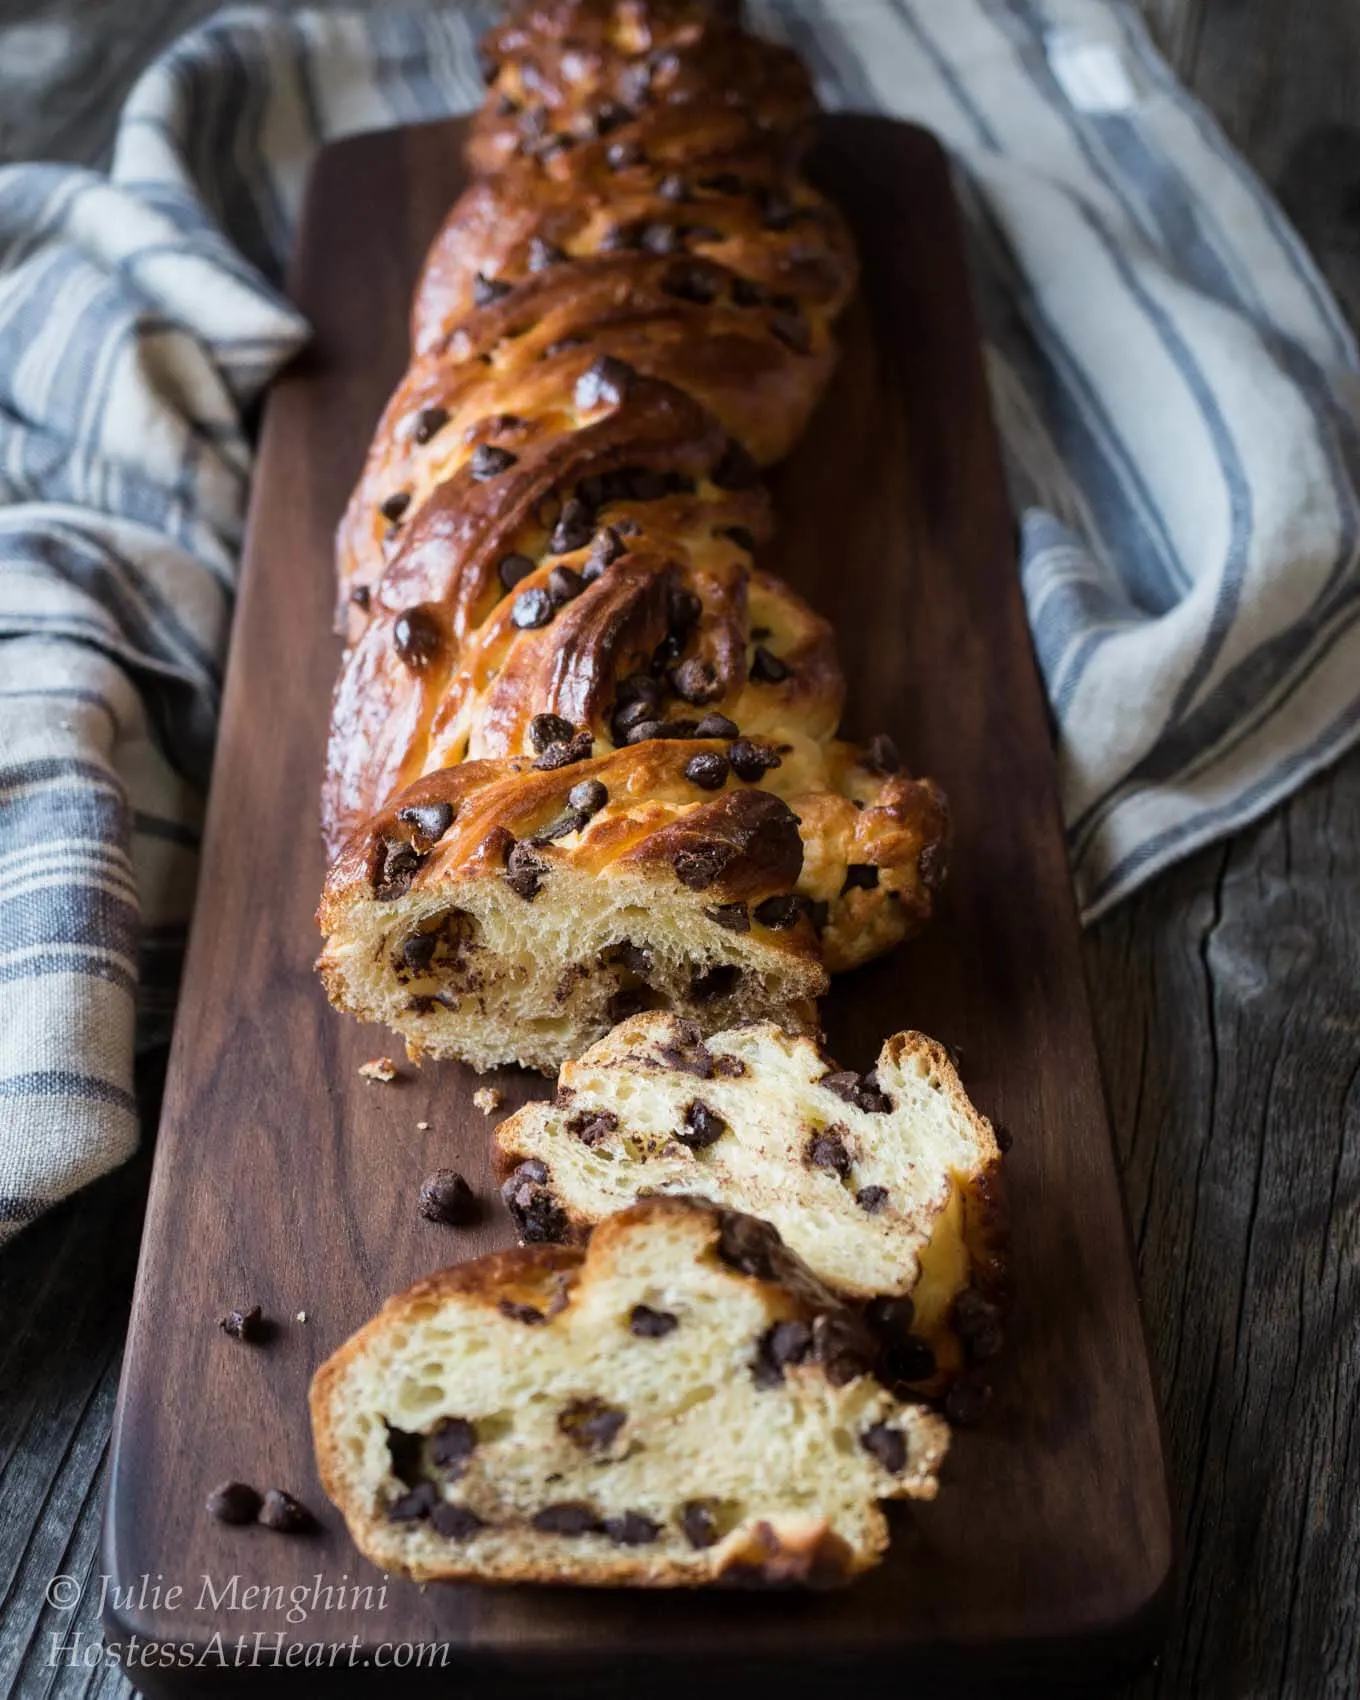 A braided chocolate bread on a bread wooden cutting board over a blue striped towel